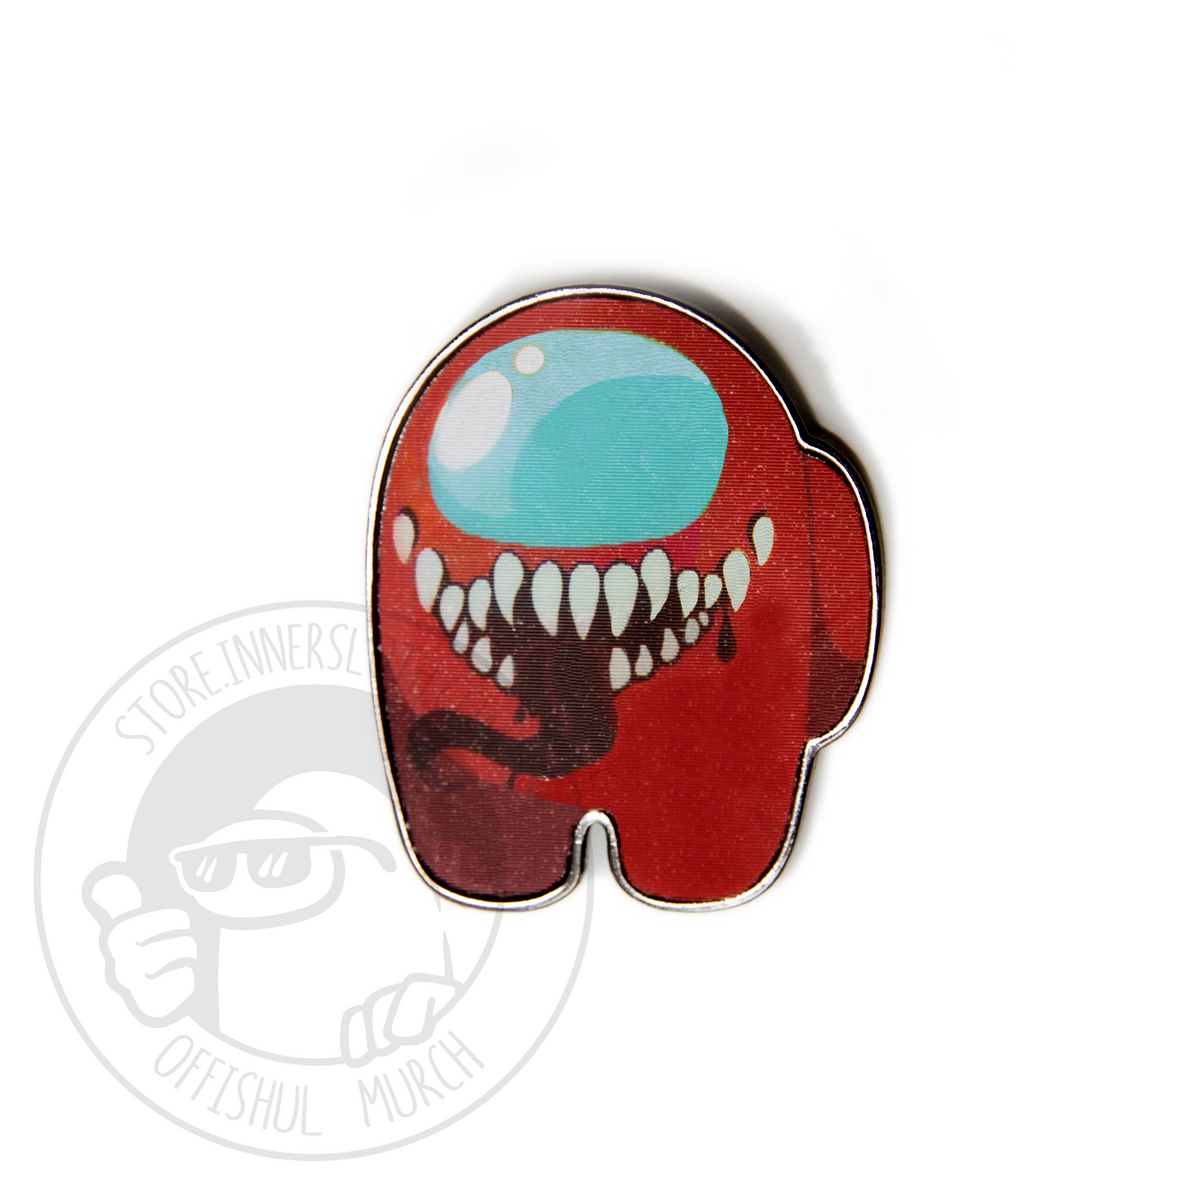 A still image of the Among Us: Lenticular Impostor Pin in Red, showing the Impostor.